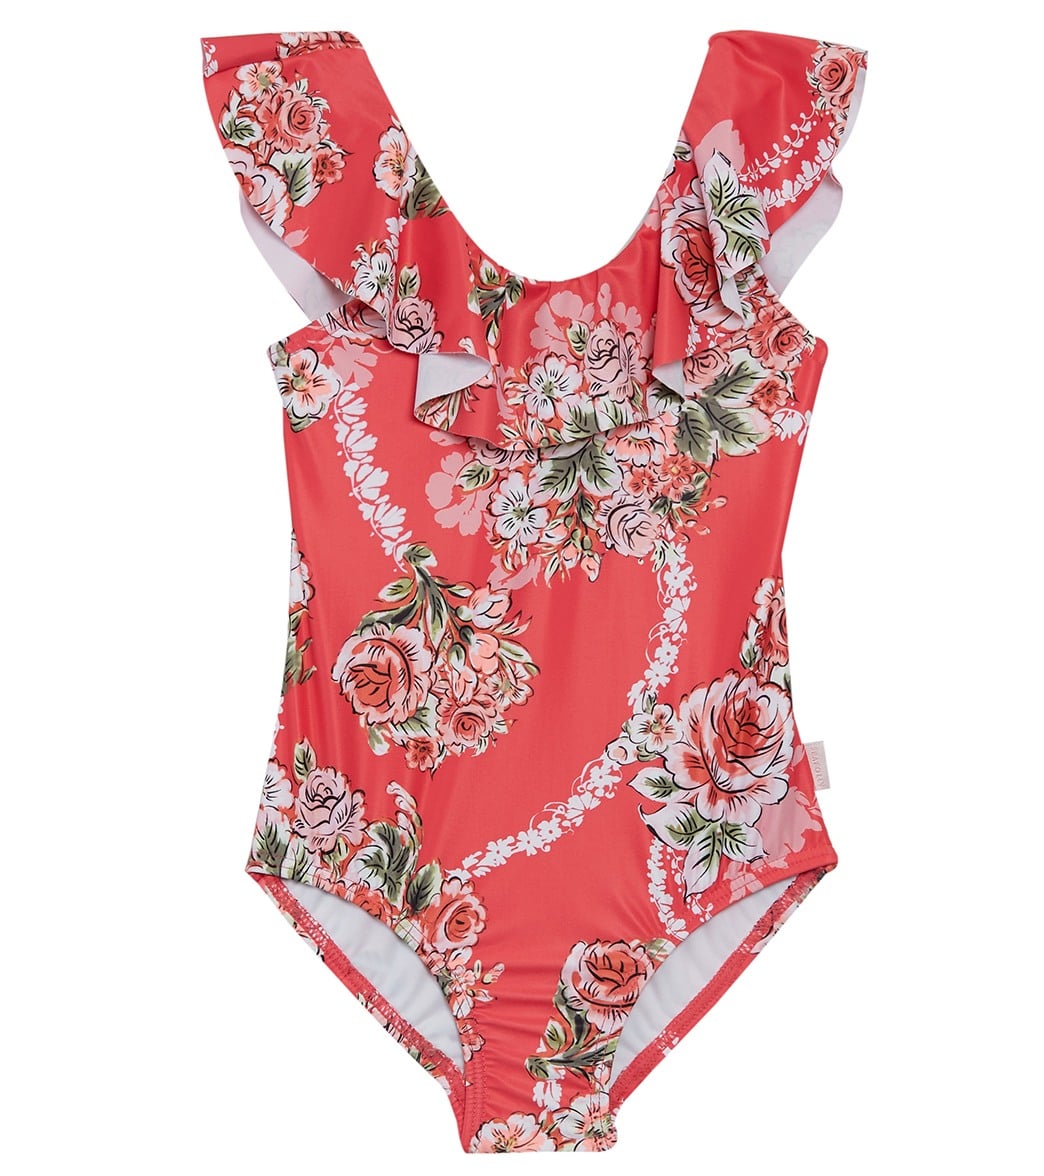 Seafolly Girls' Little Village In Como Ruffle One Piece Swimsuit Baby Toddler Kid - Rose Pink 0 Polyester/Elastane - Swimoutlet.com